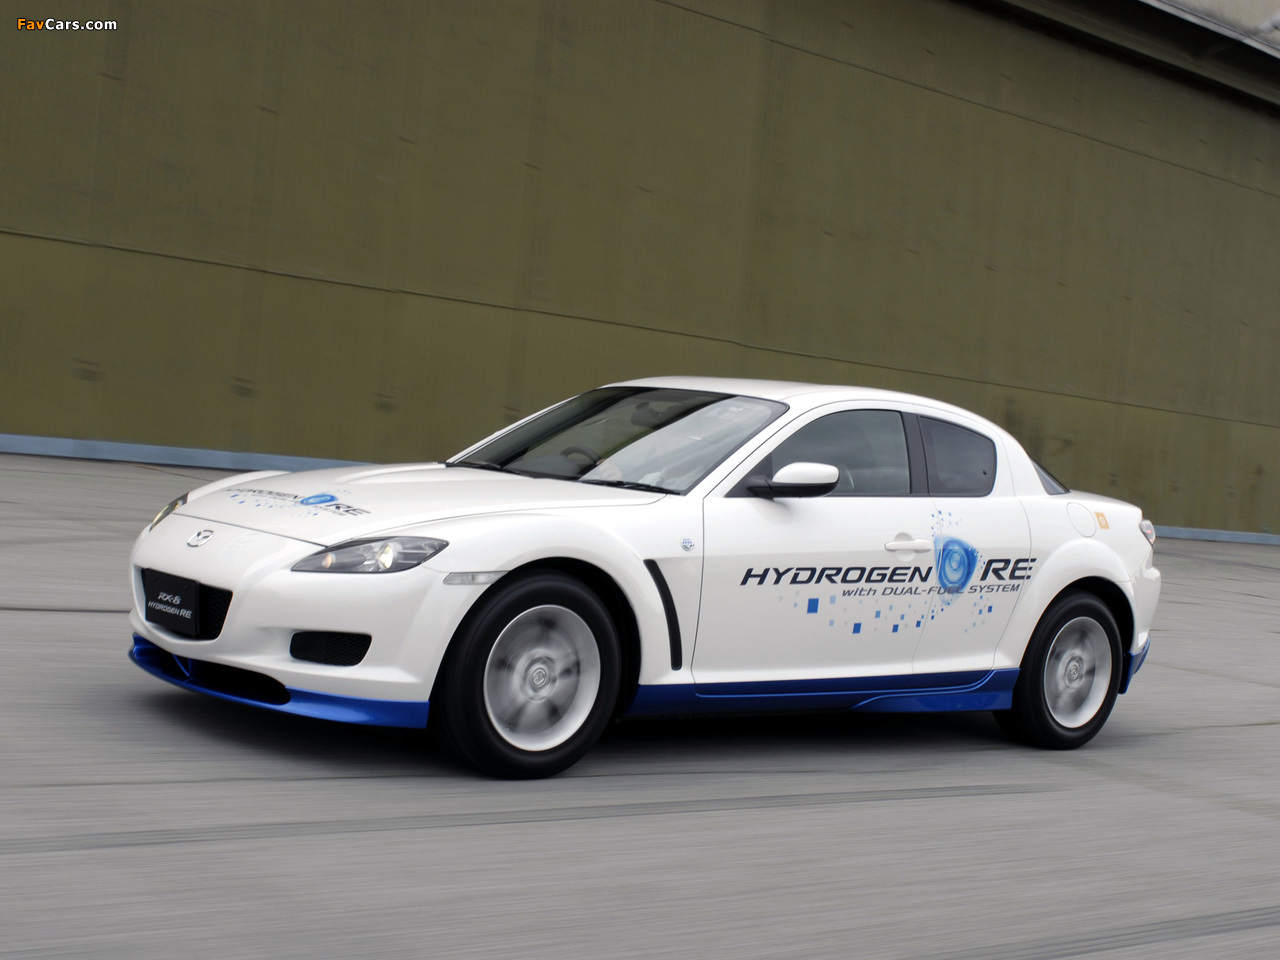 Mazda RX-8 Hydrogen RE 2004–08 pictures (1280 x 960)